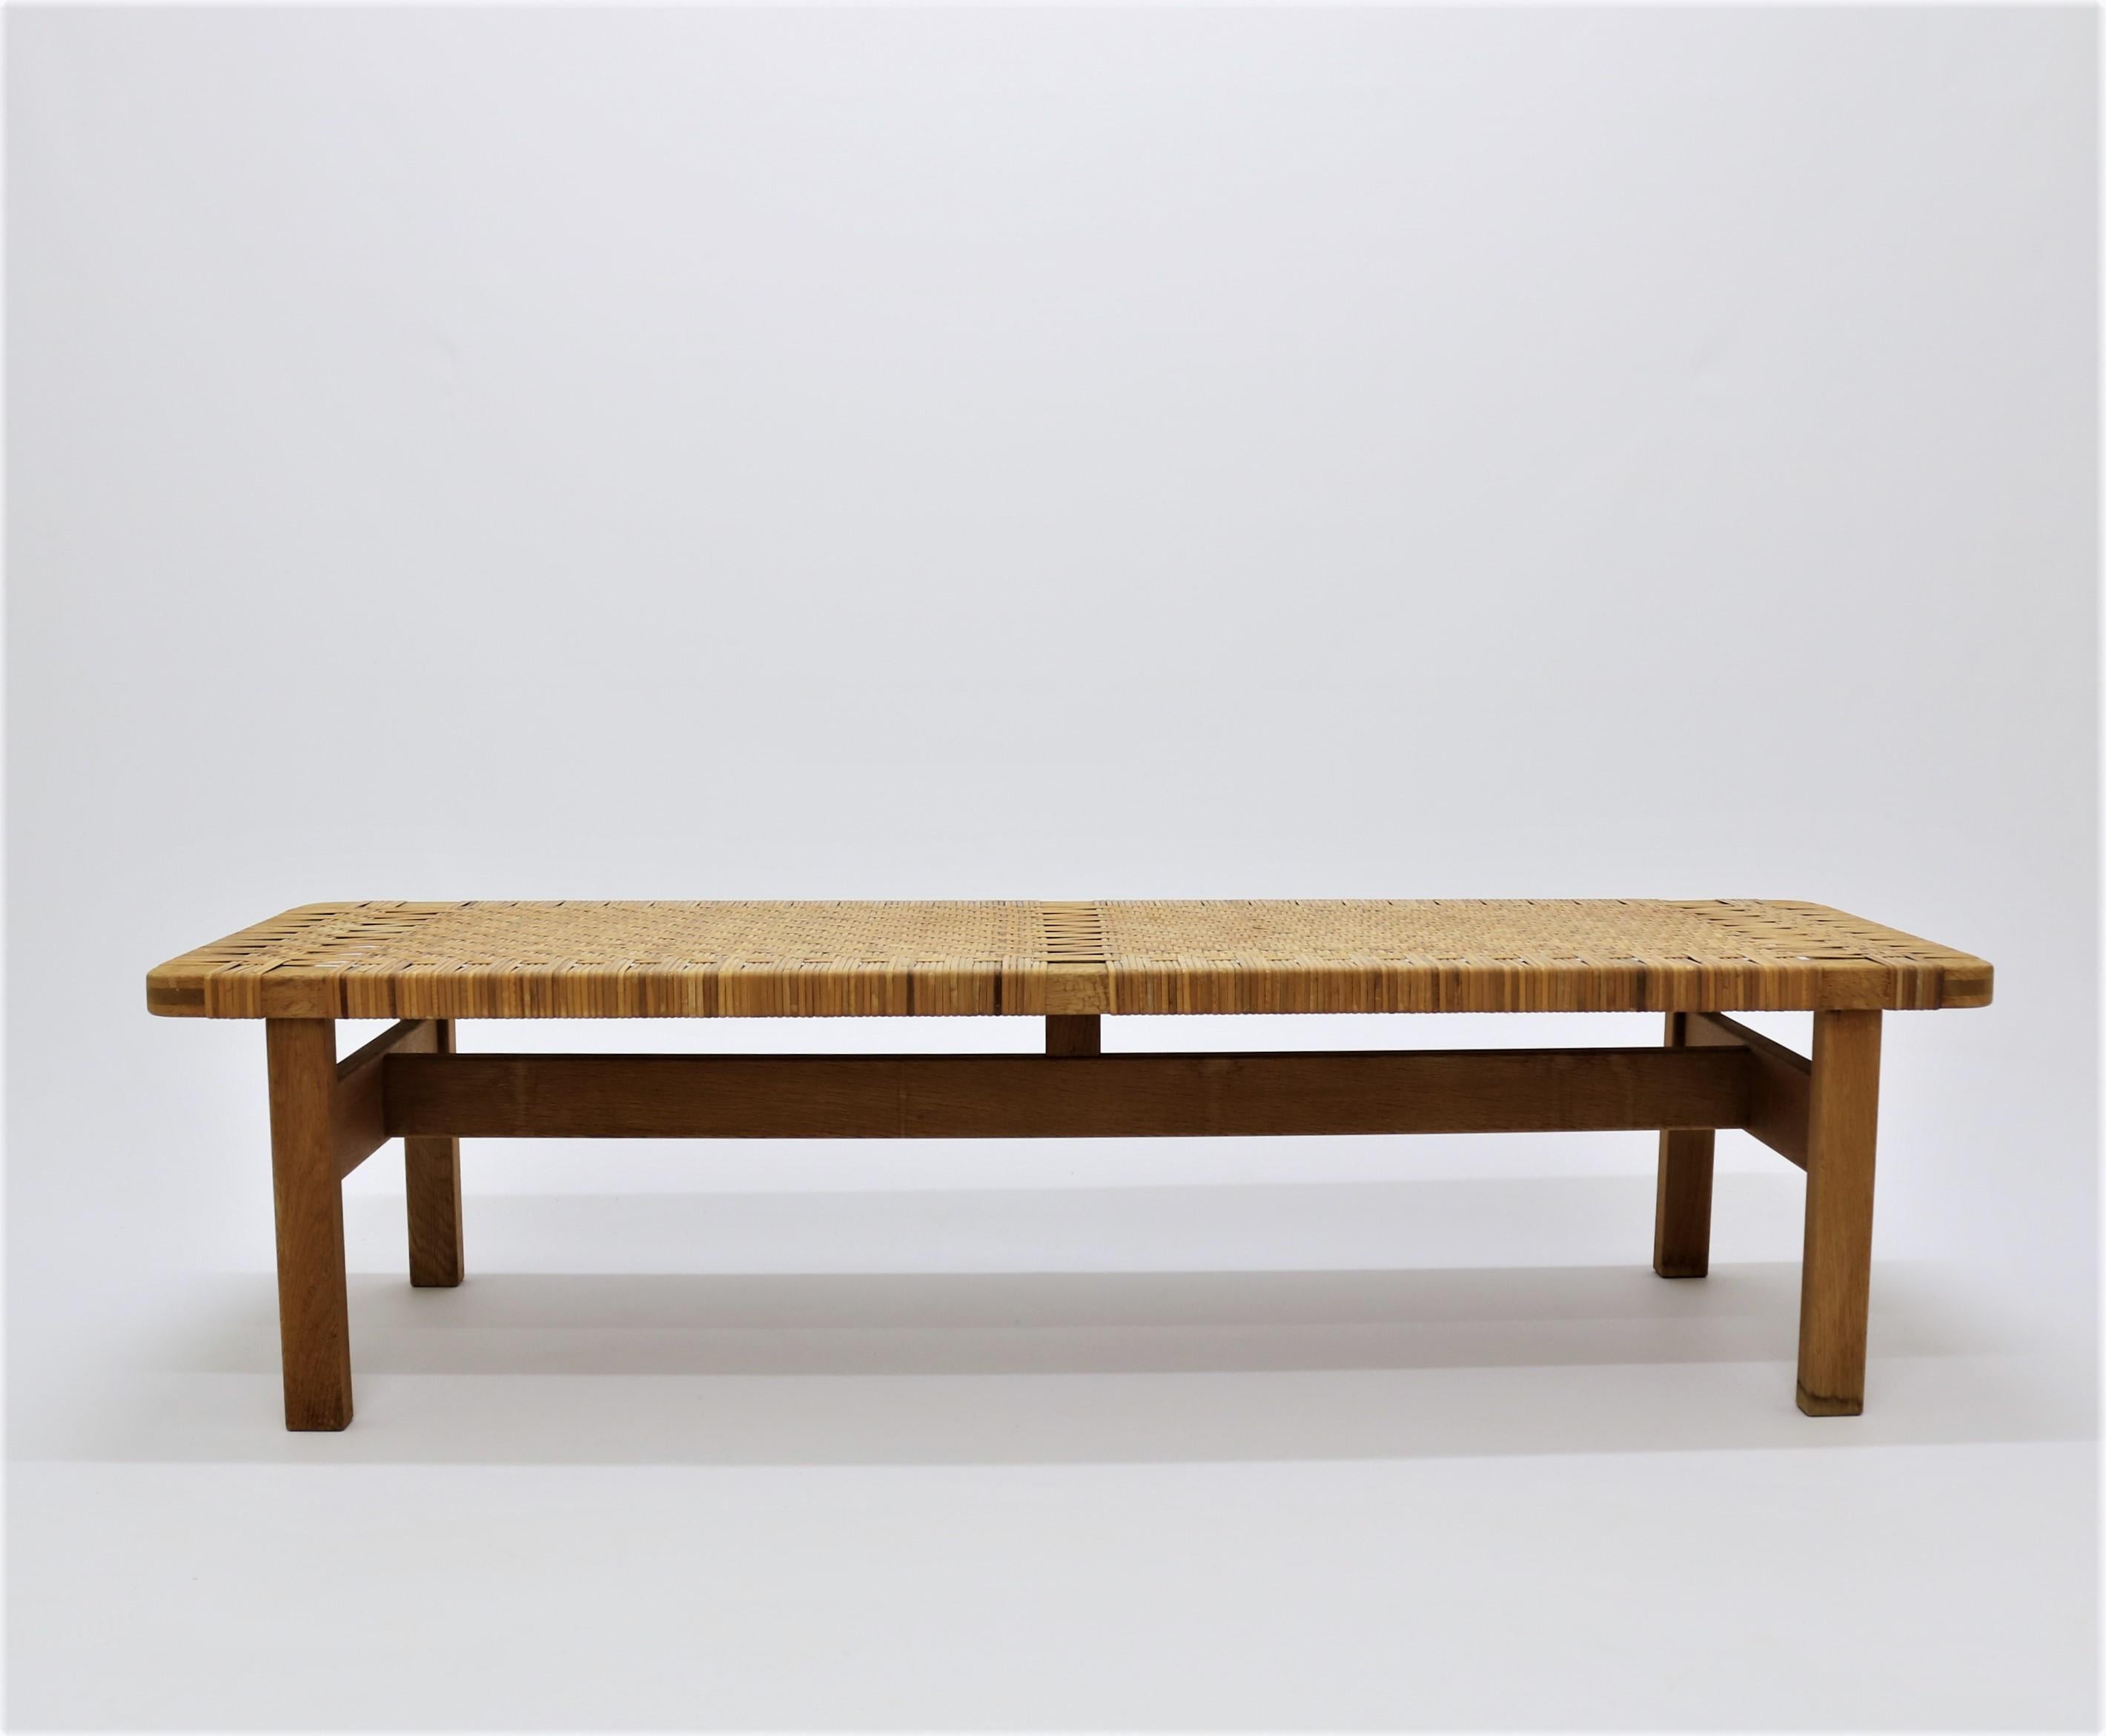 Bench or side table designed by Børge Mogensen in the 1950s for Fredericia Stolefabrik. The unit is made from solid oak and woven cane and is on original vintage condition.